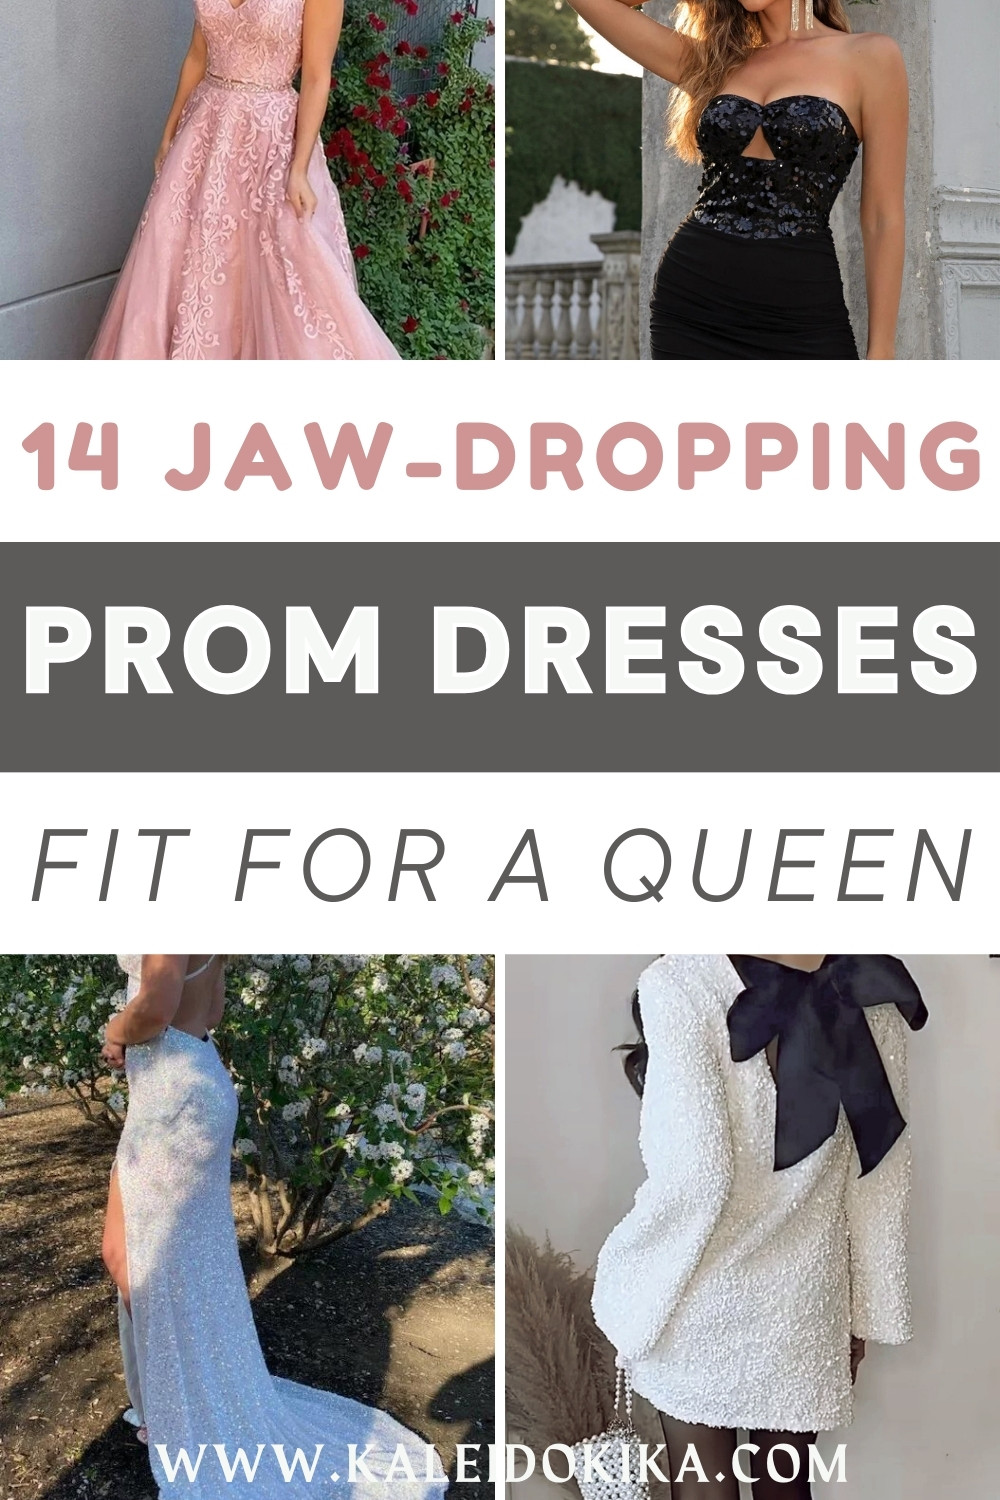 Image showing some jaw dropping prom dresses ideas